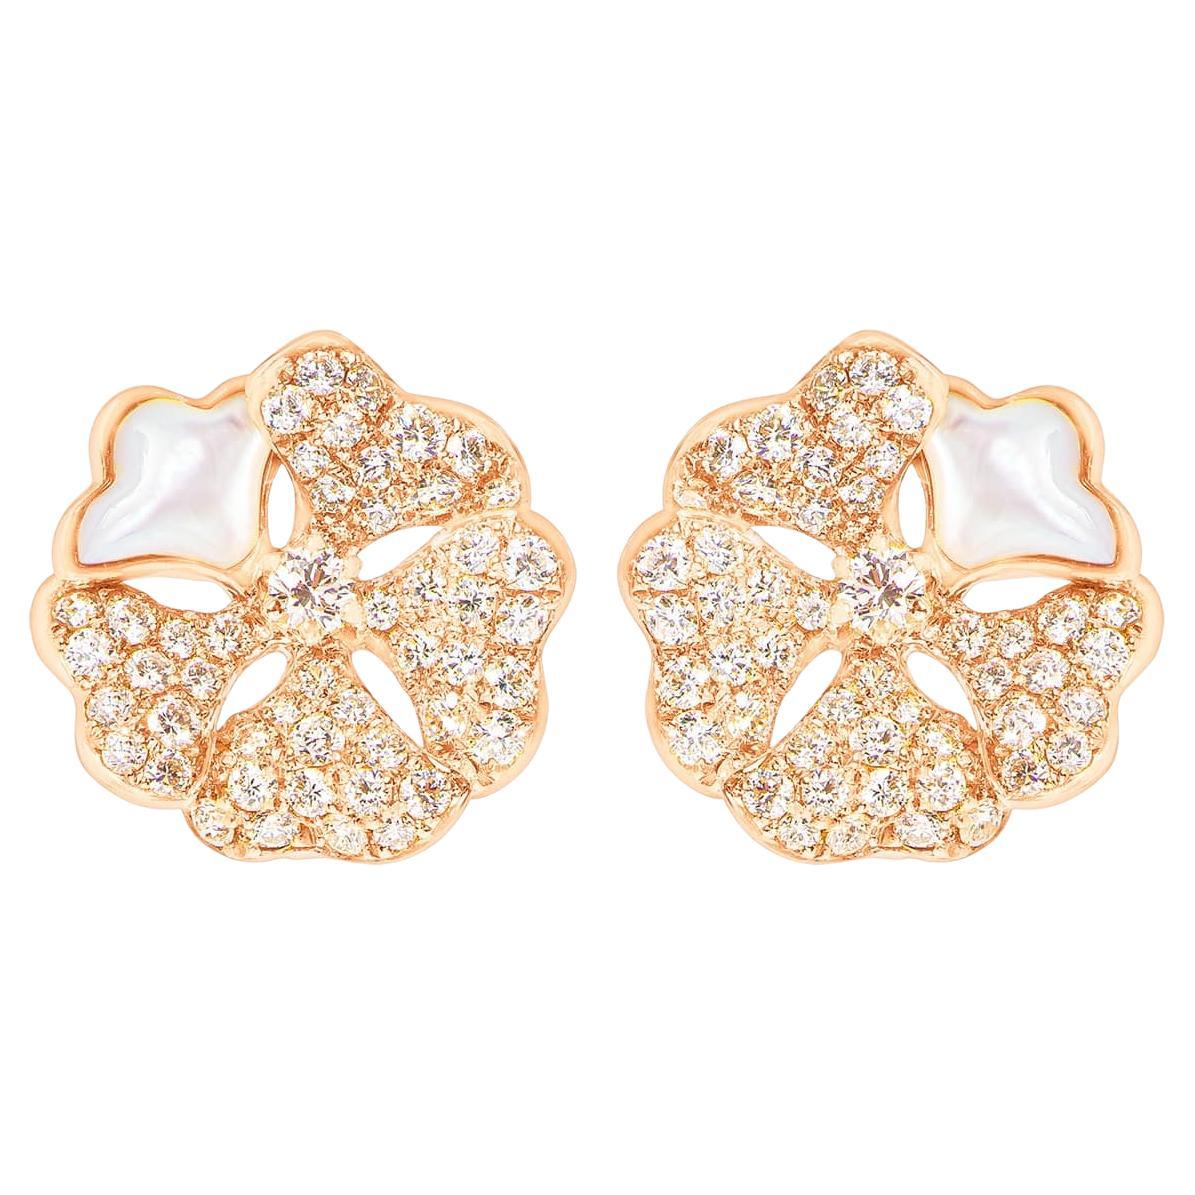 Bloom Diamond and White Mother-of-pearl Bloom Earring Tops in 18k Rose Gold